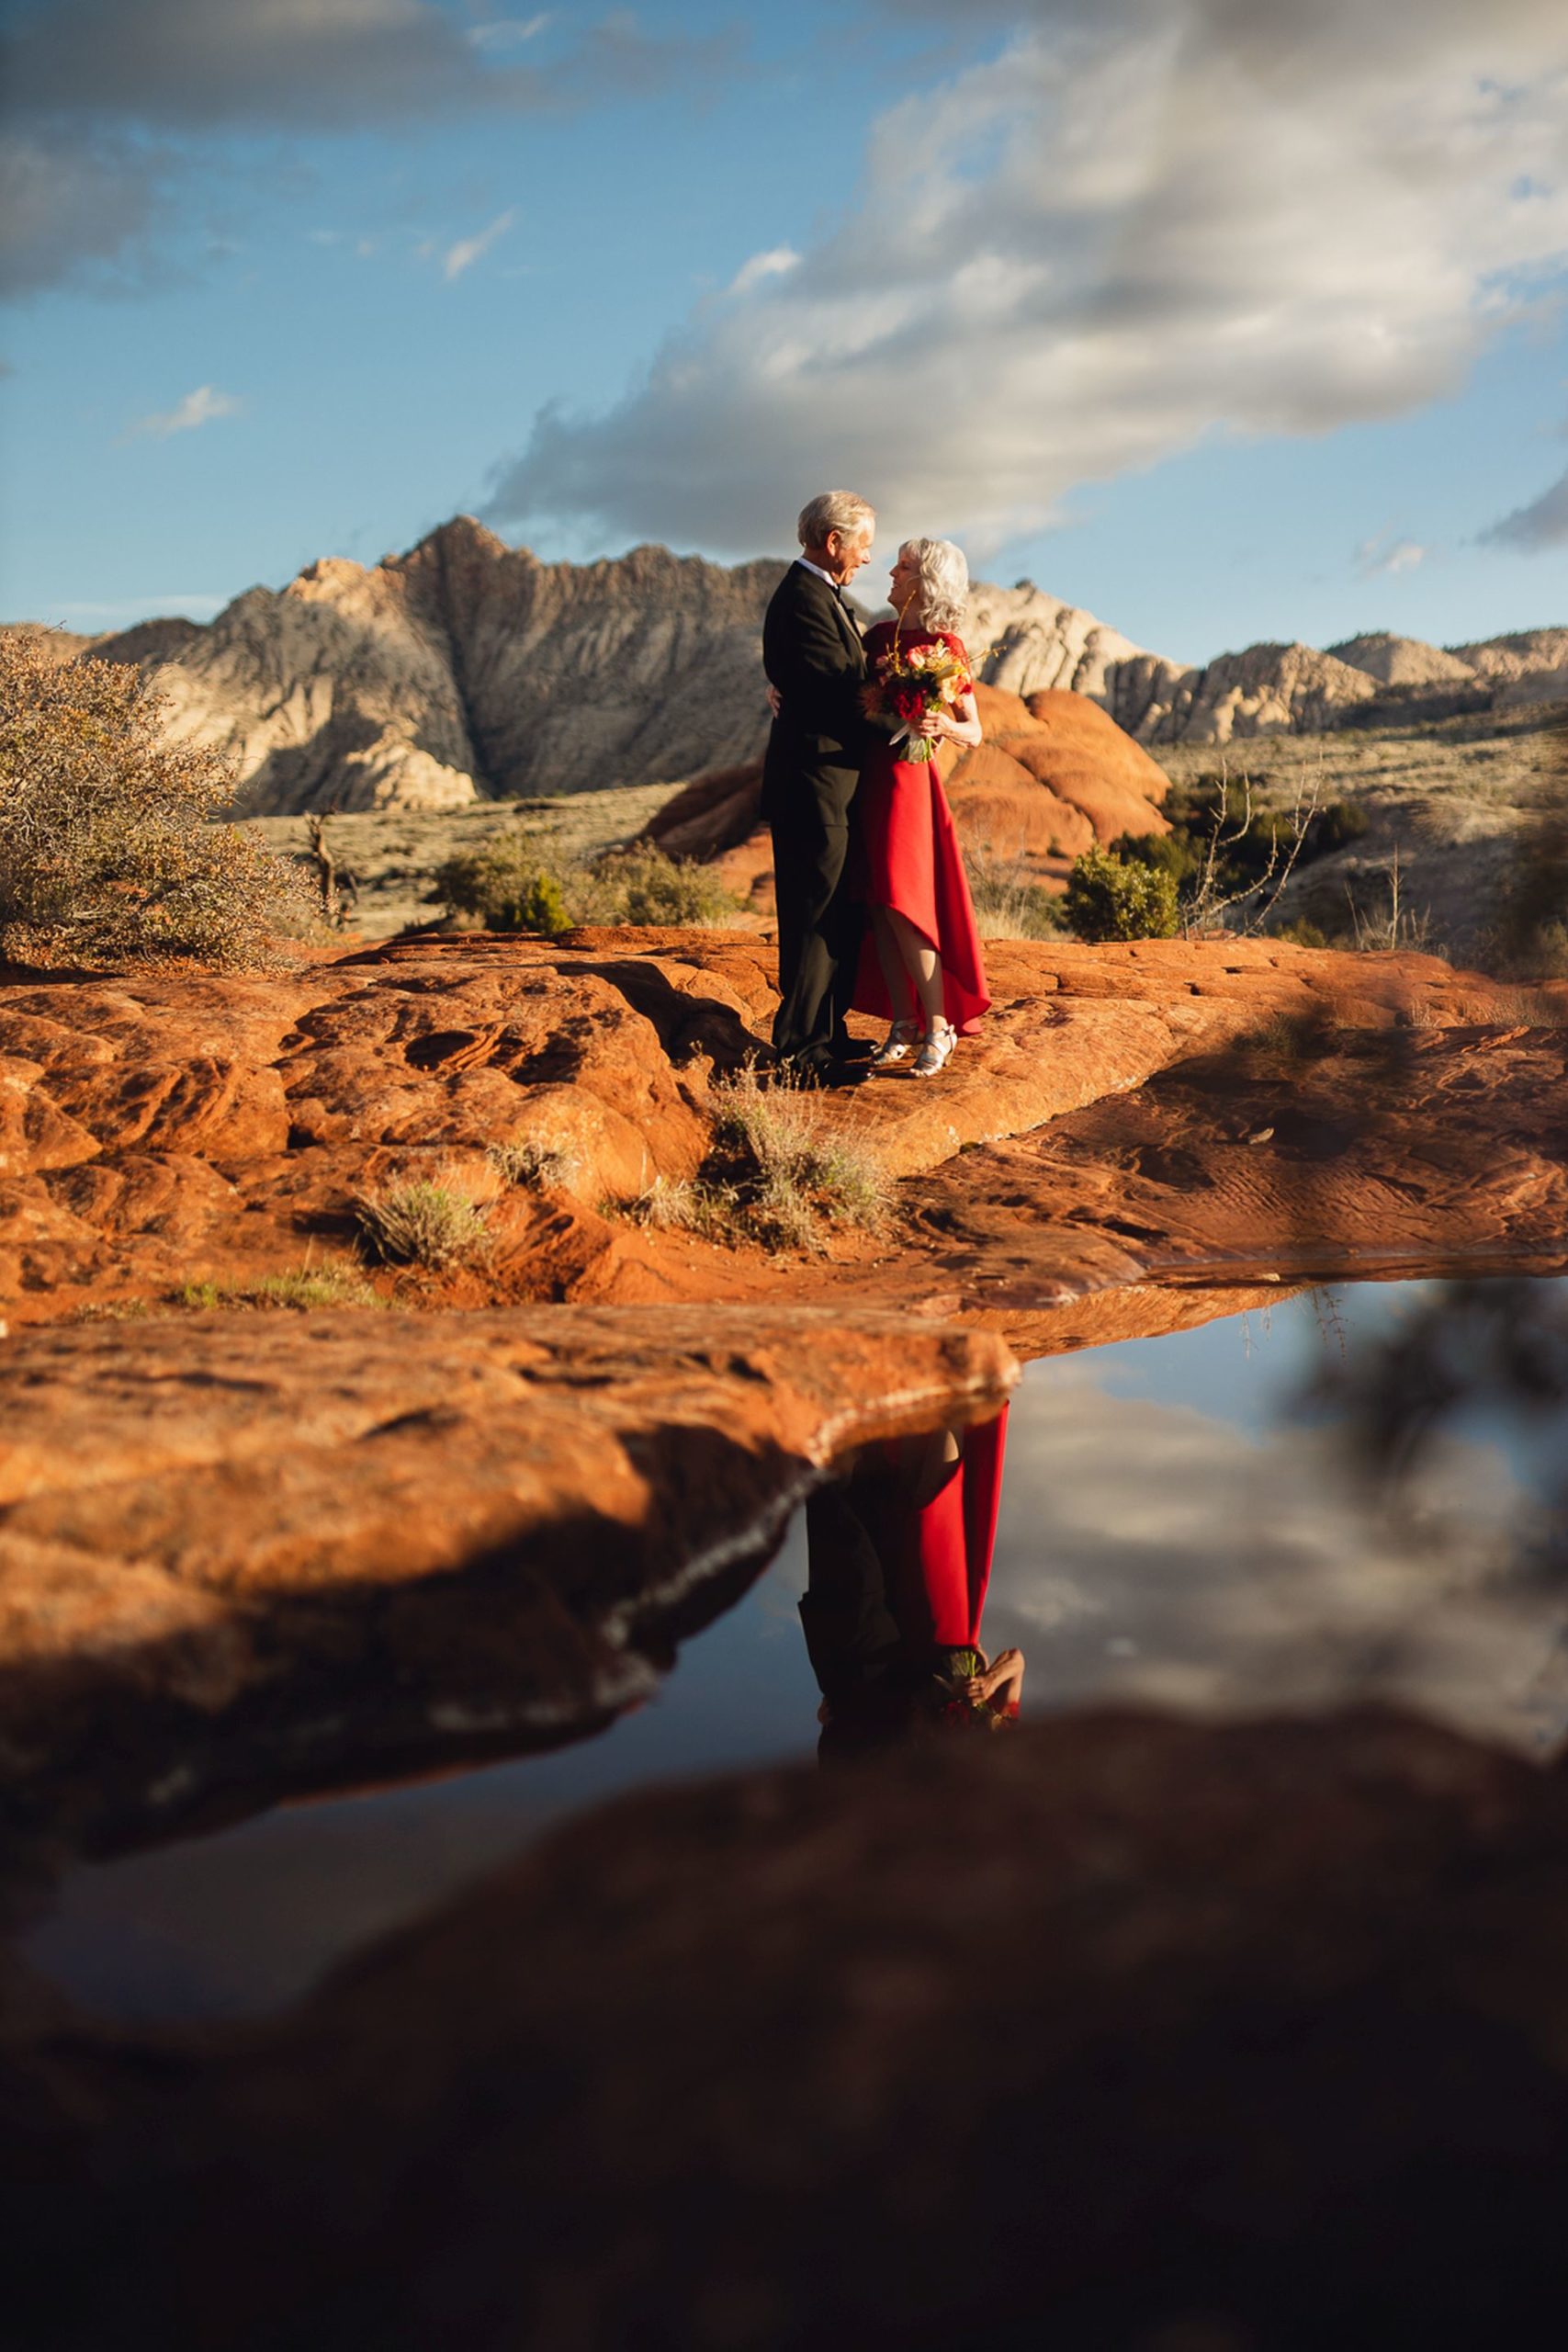 elopement wedding in the desert of utah - couple at wedding photo session at sunset